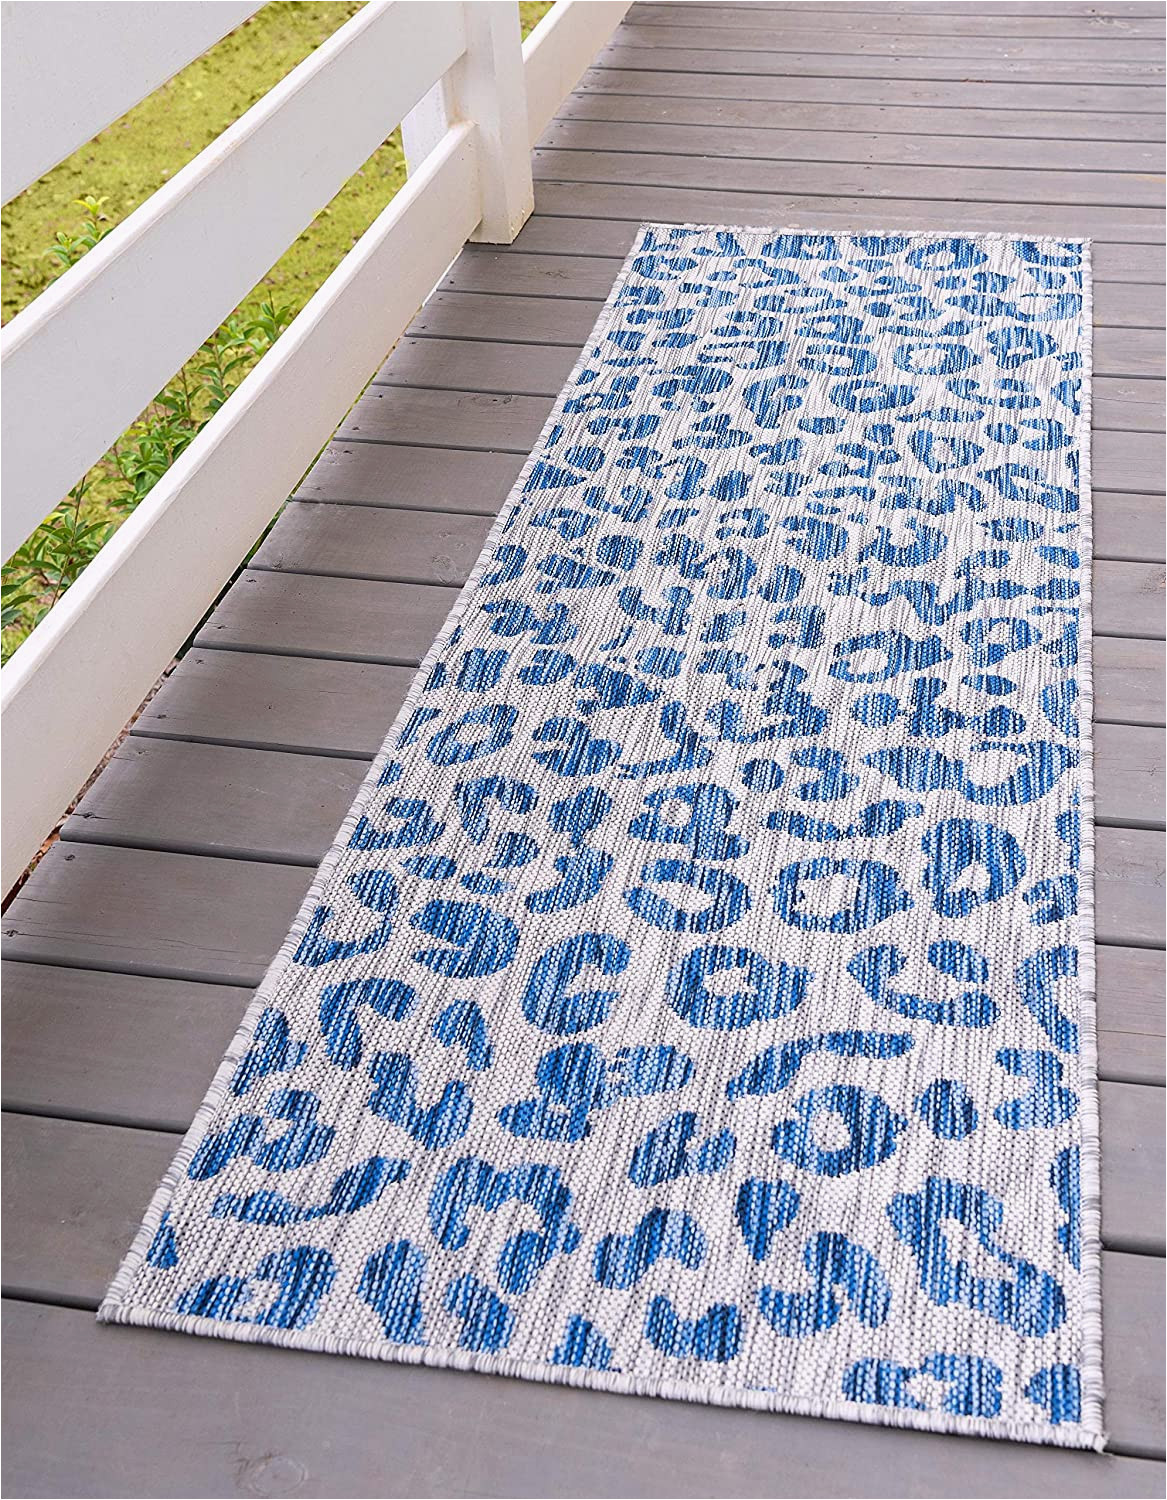 Blue Cheetah Print Rug Unique Loom Outdoor Safari Collection Leopard Animal Print Transitional Indoor and Outdoor Flatweave Blue Runner Rug 2 0 X 6 0